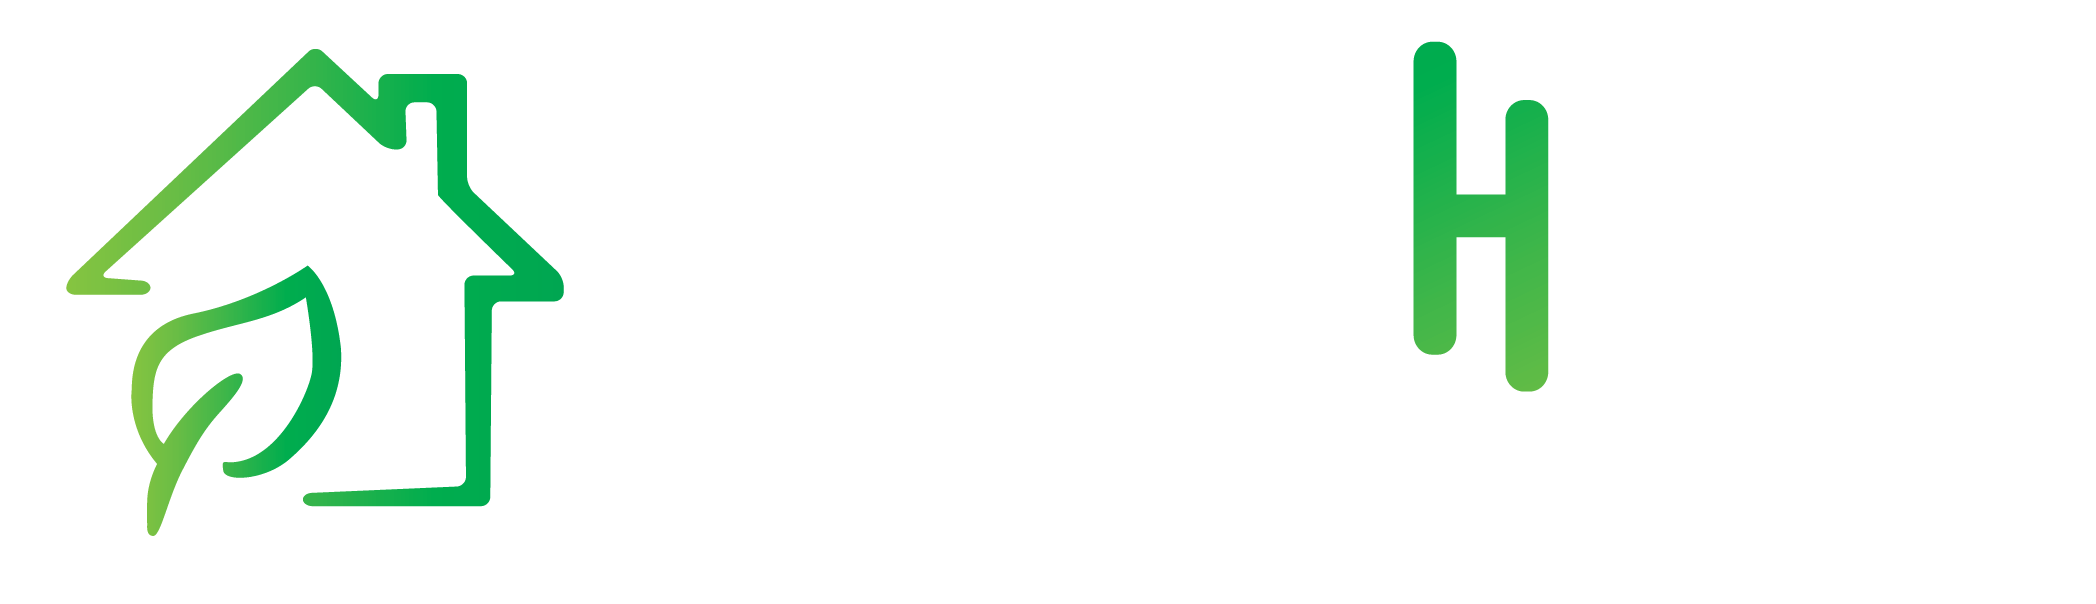 Green Home Group